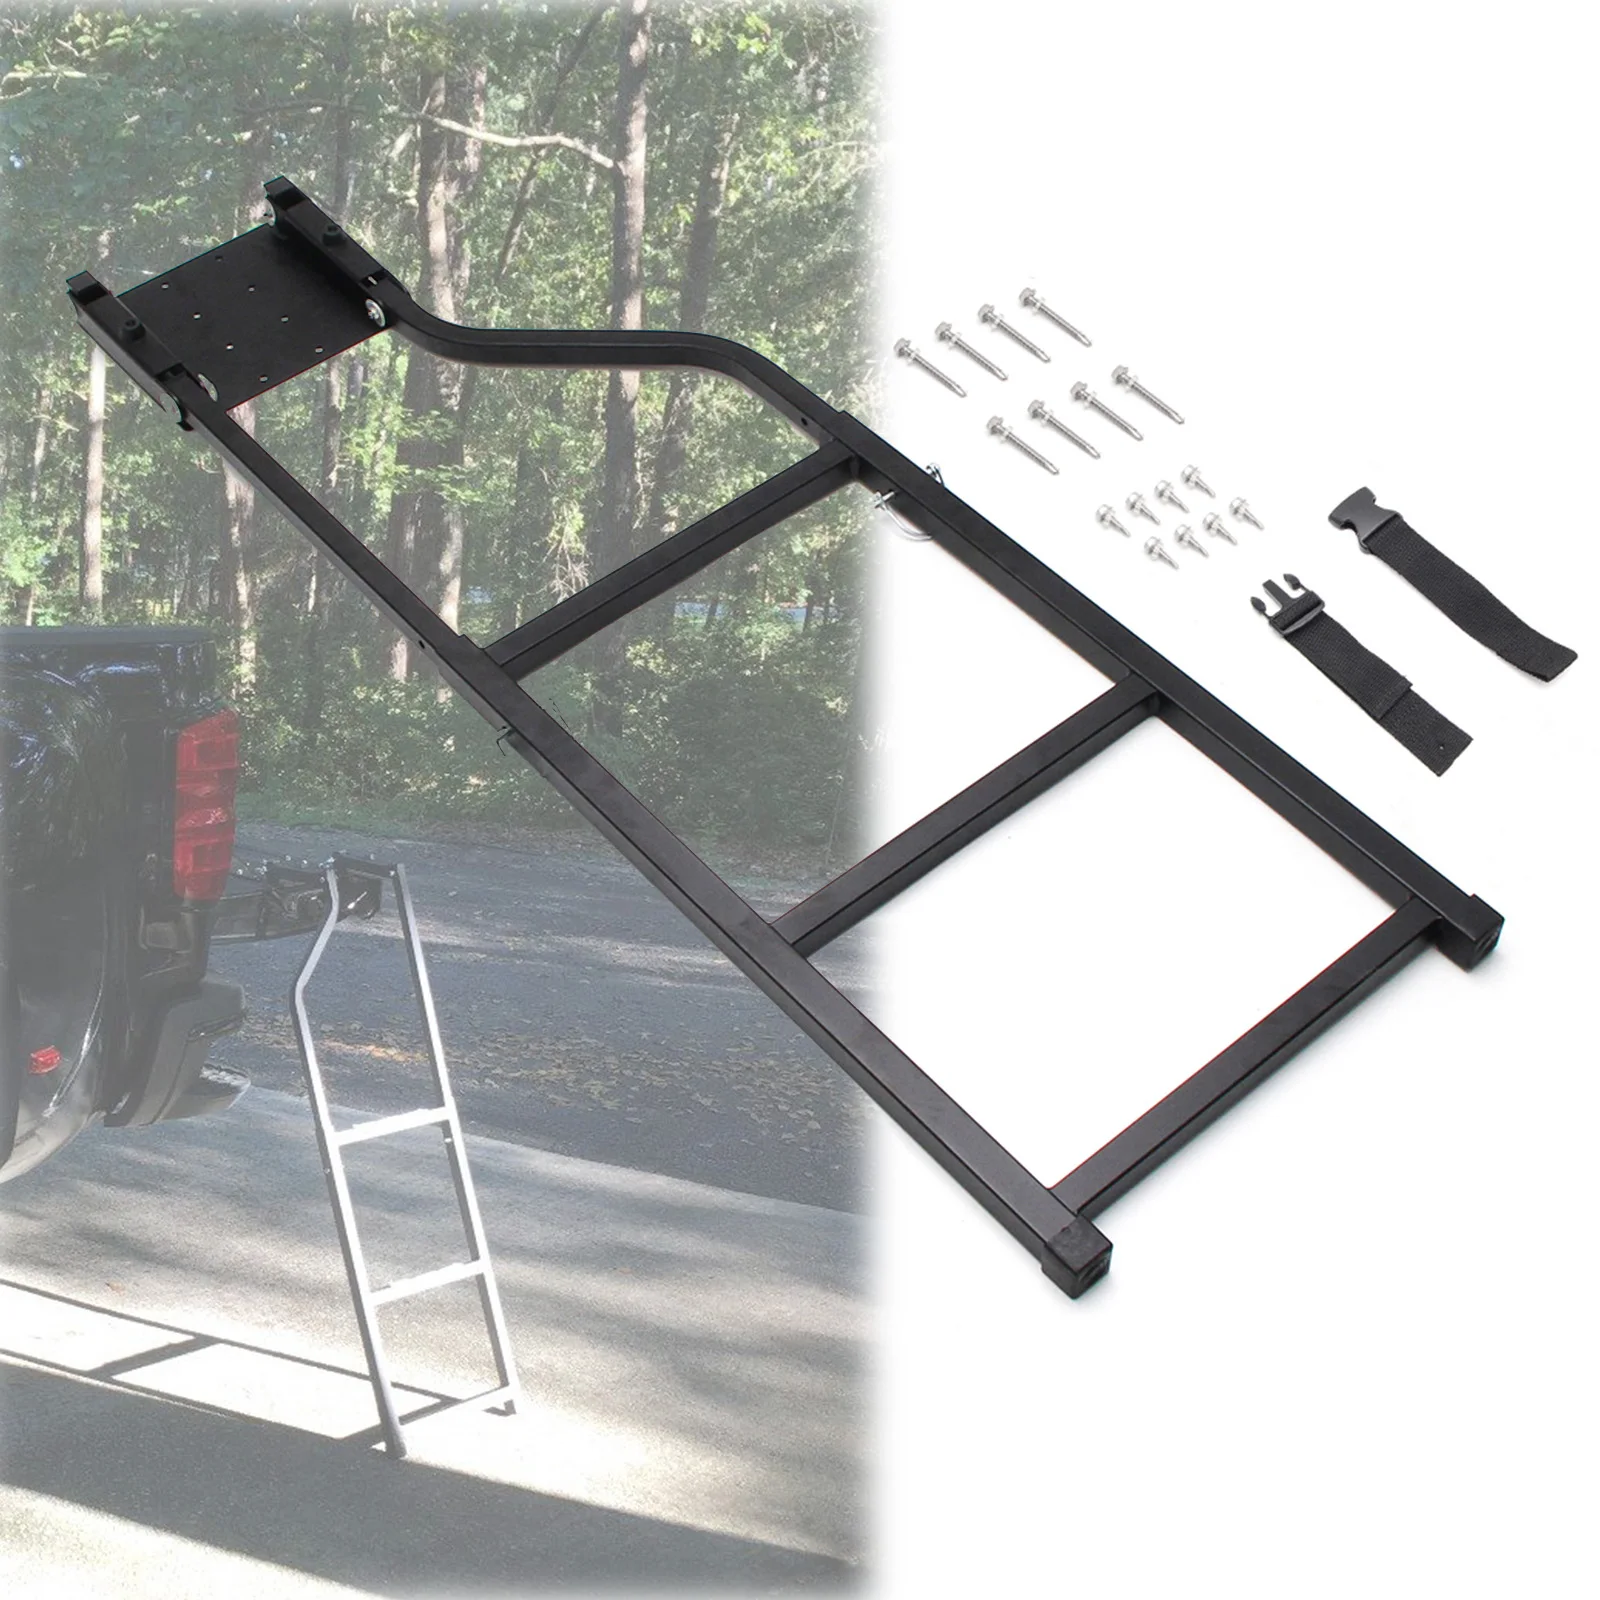 1 pcs Pickup Tailgate Step Cargo Accessories Truck Bed Ladder Universal Extension Step Ladder with Stainless Steel Self Drilling